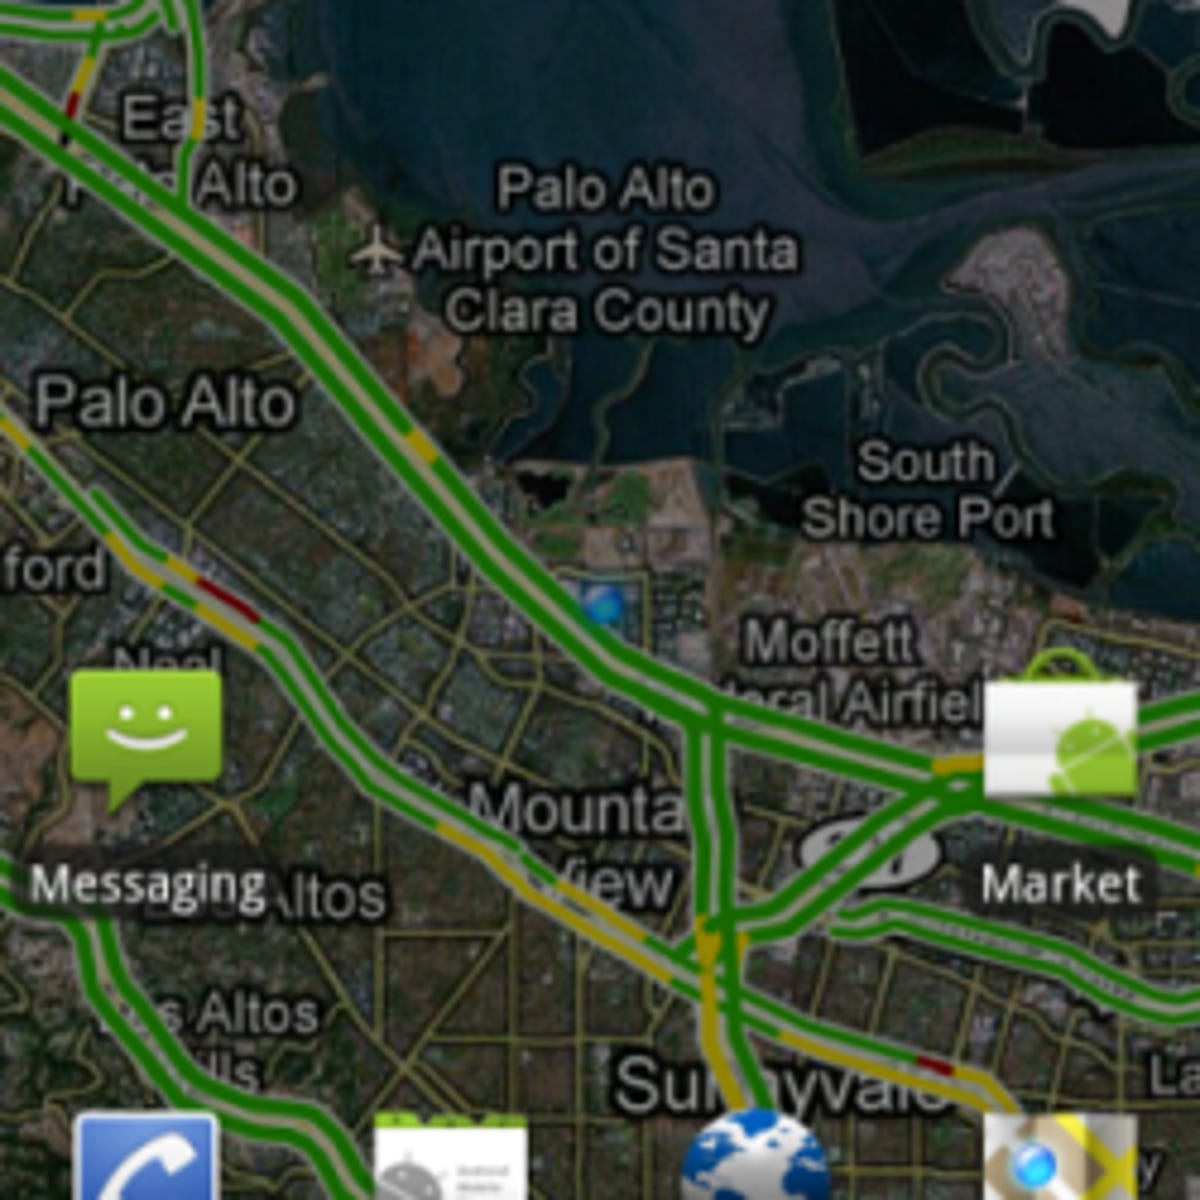 Make Google Maps your live Android wallpaper - CNET